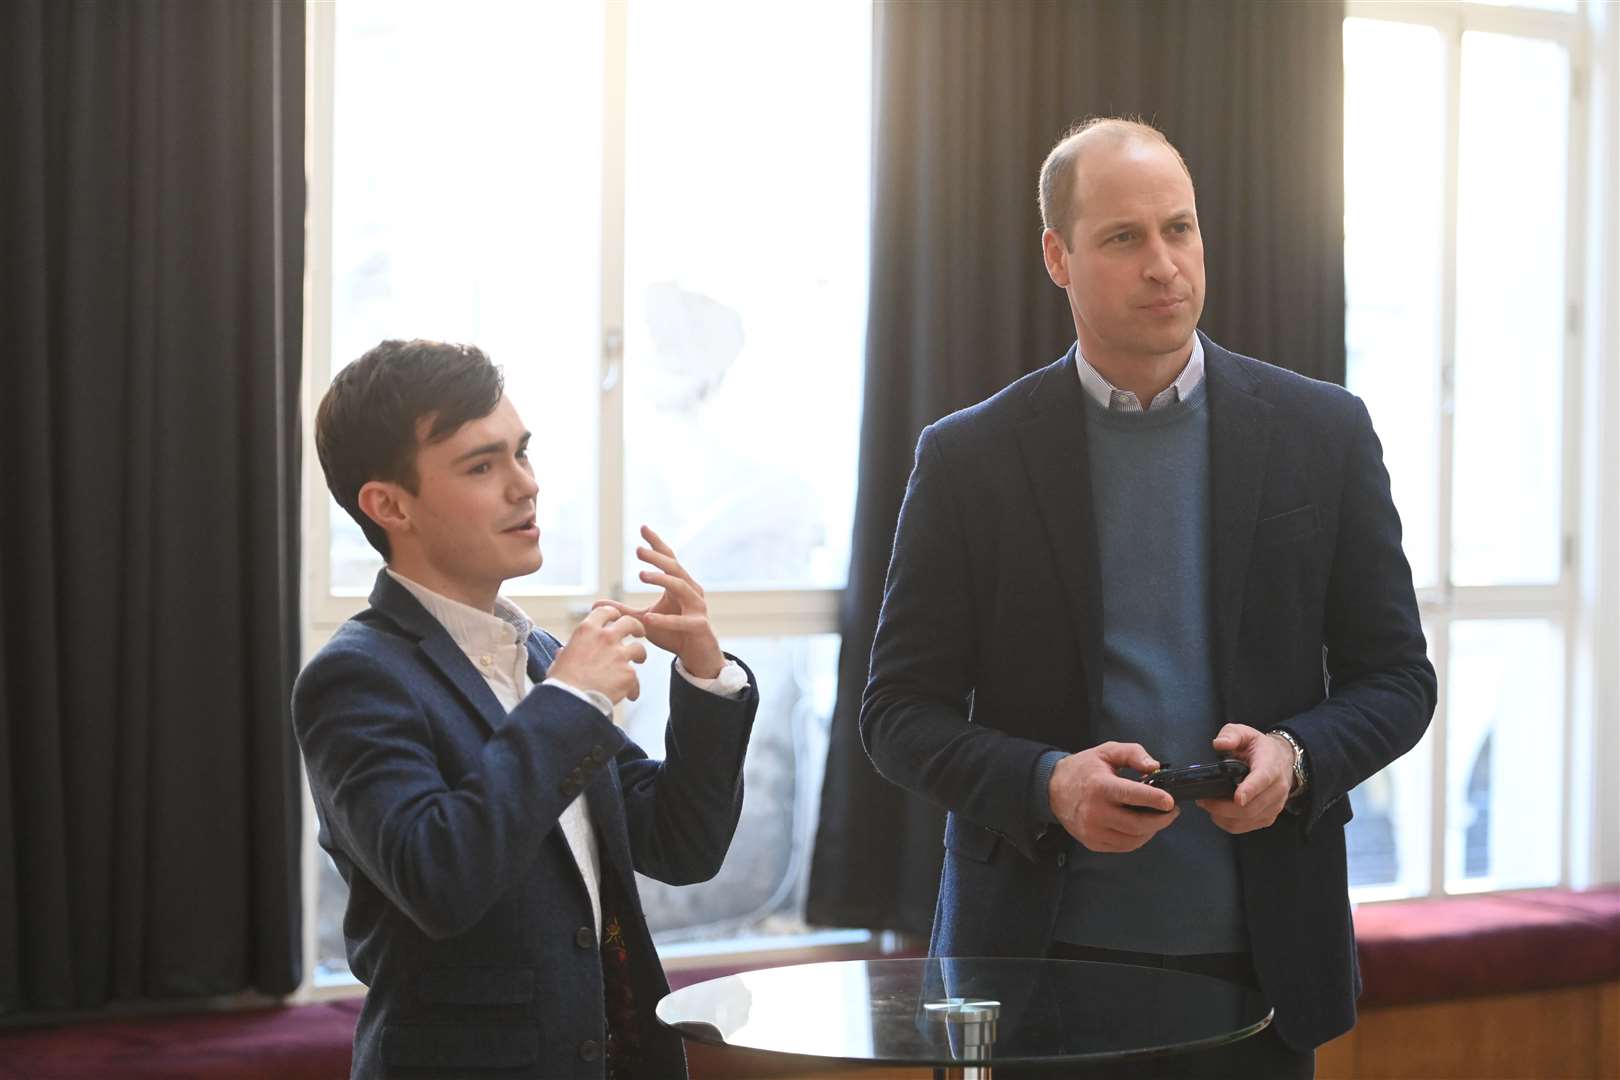 William tries his hand playing a game at Bafta’s HQ (Paul Grover/Daily Telegraph/PA)